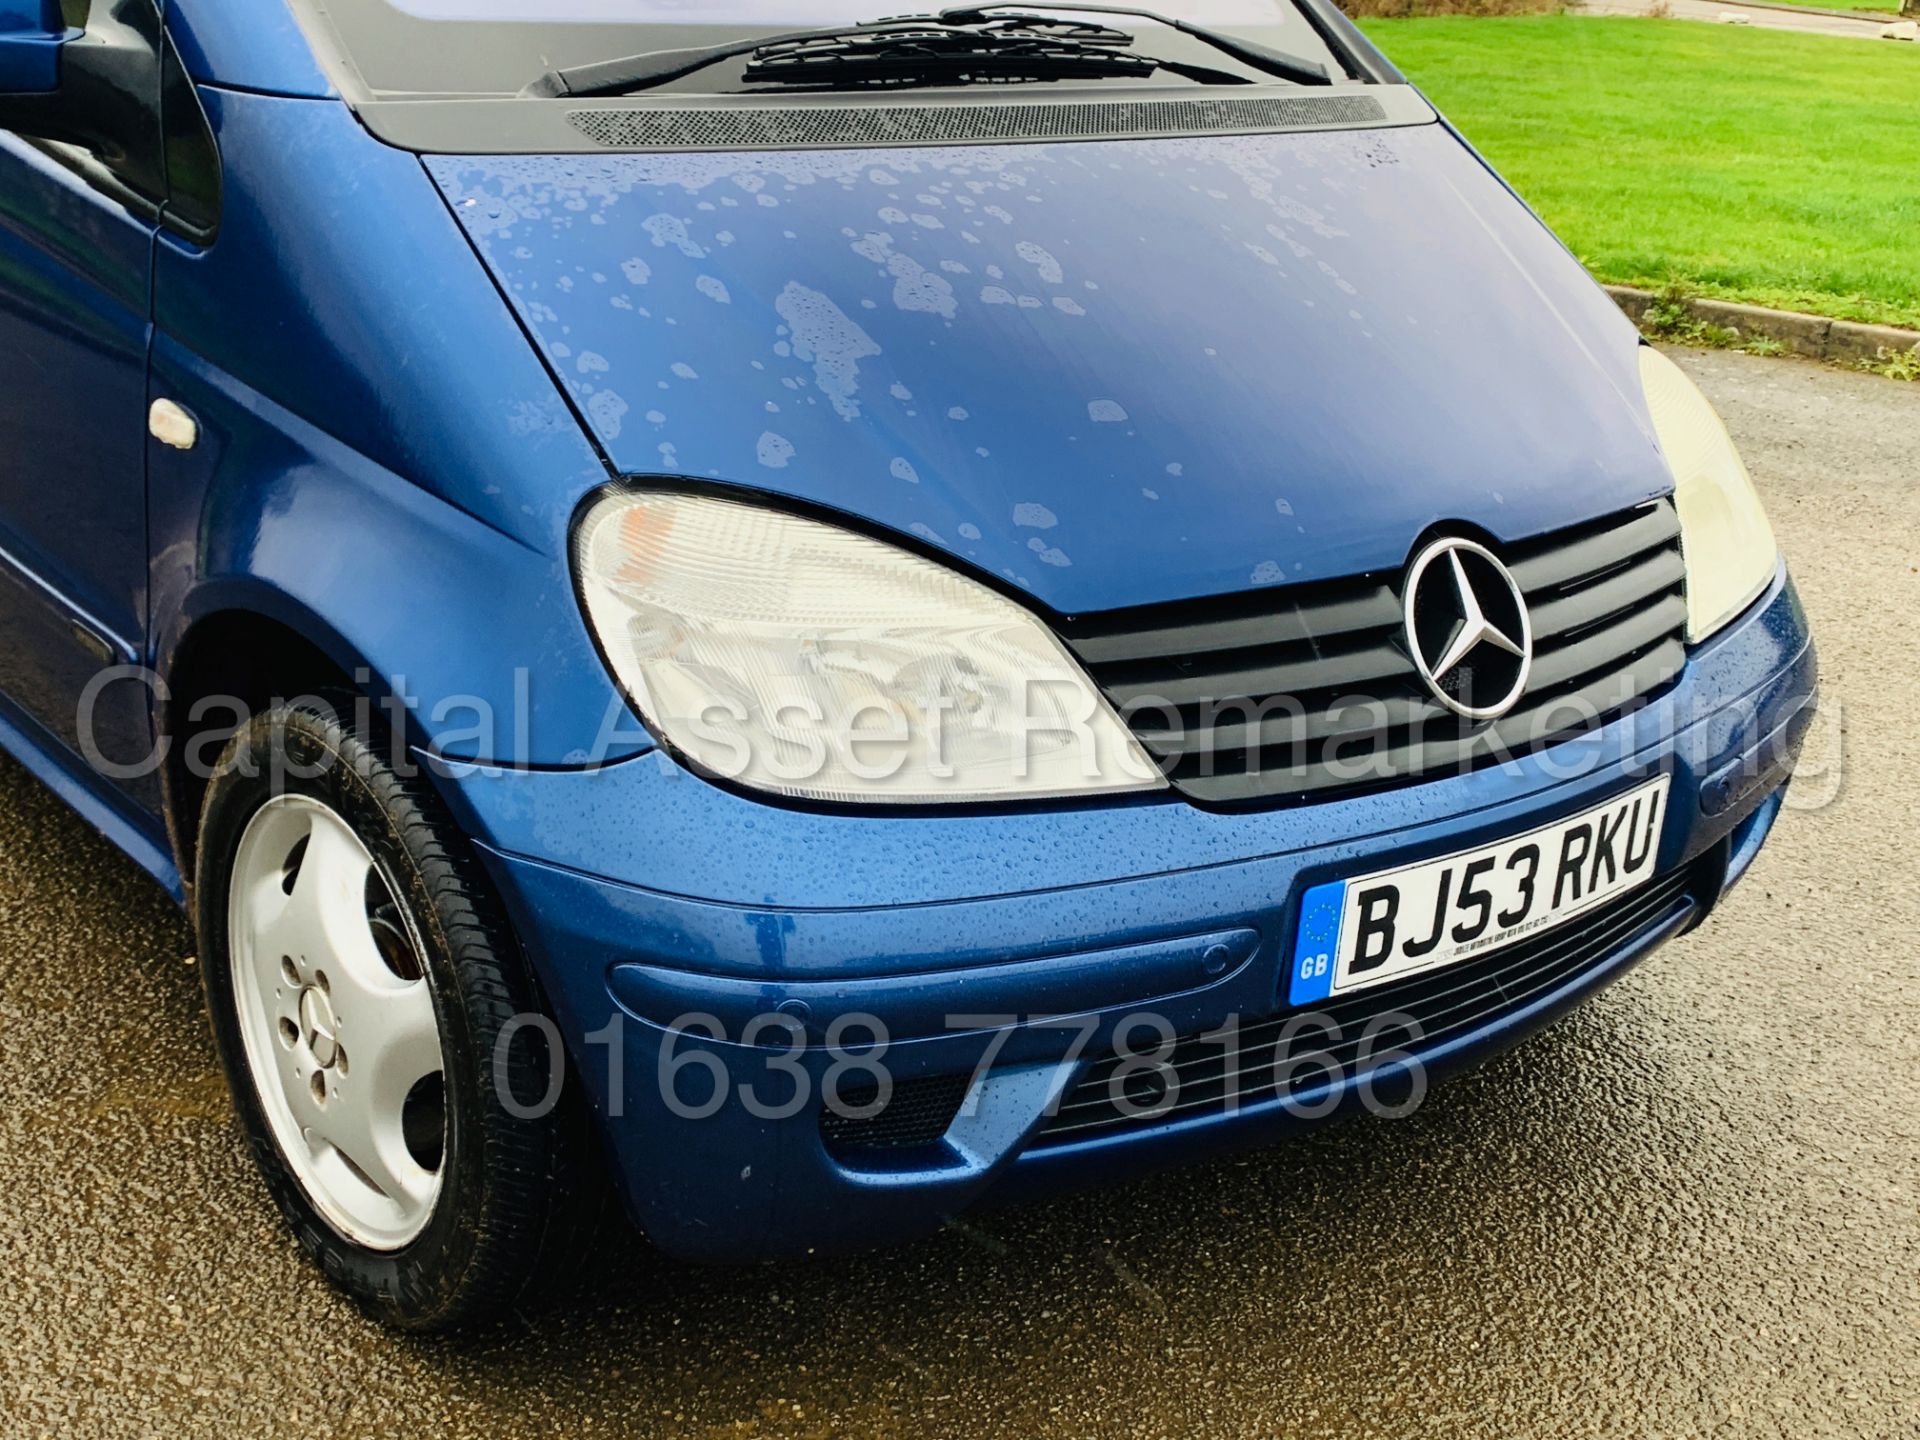 (On Sale) MERCEDES-BENZ VANEO *AMBIENT* WHEEL CHAIR ACCESS VEHICLE (53 REG) '1.6 PETROL - AUTO' - Image 11 of 34